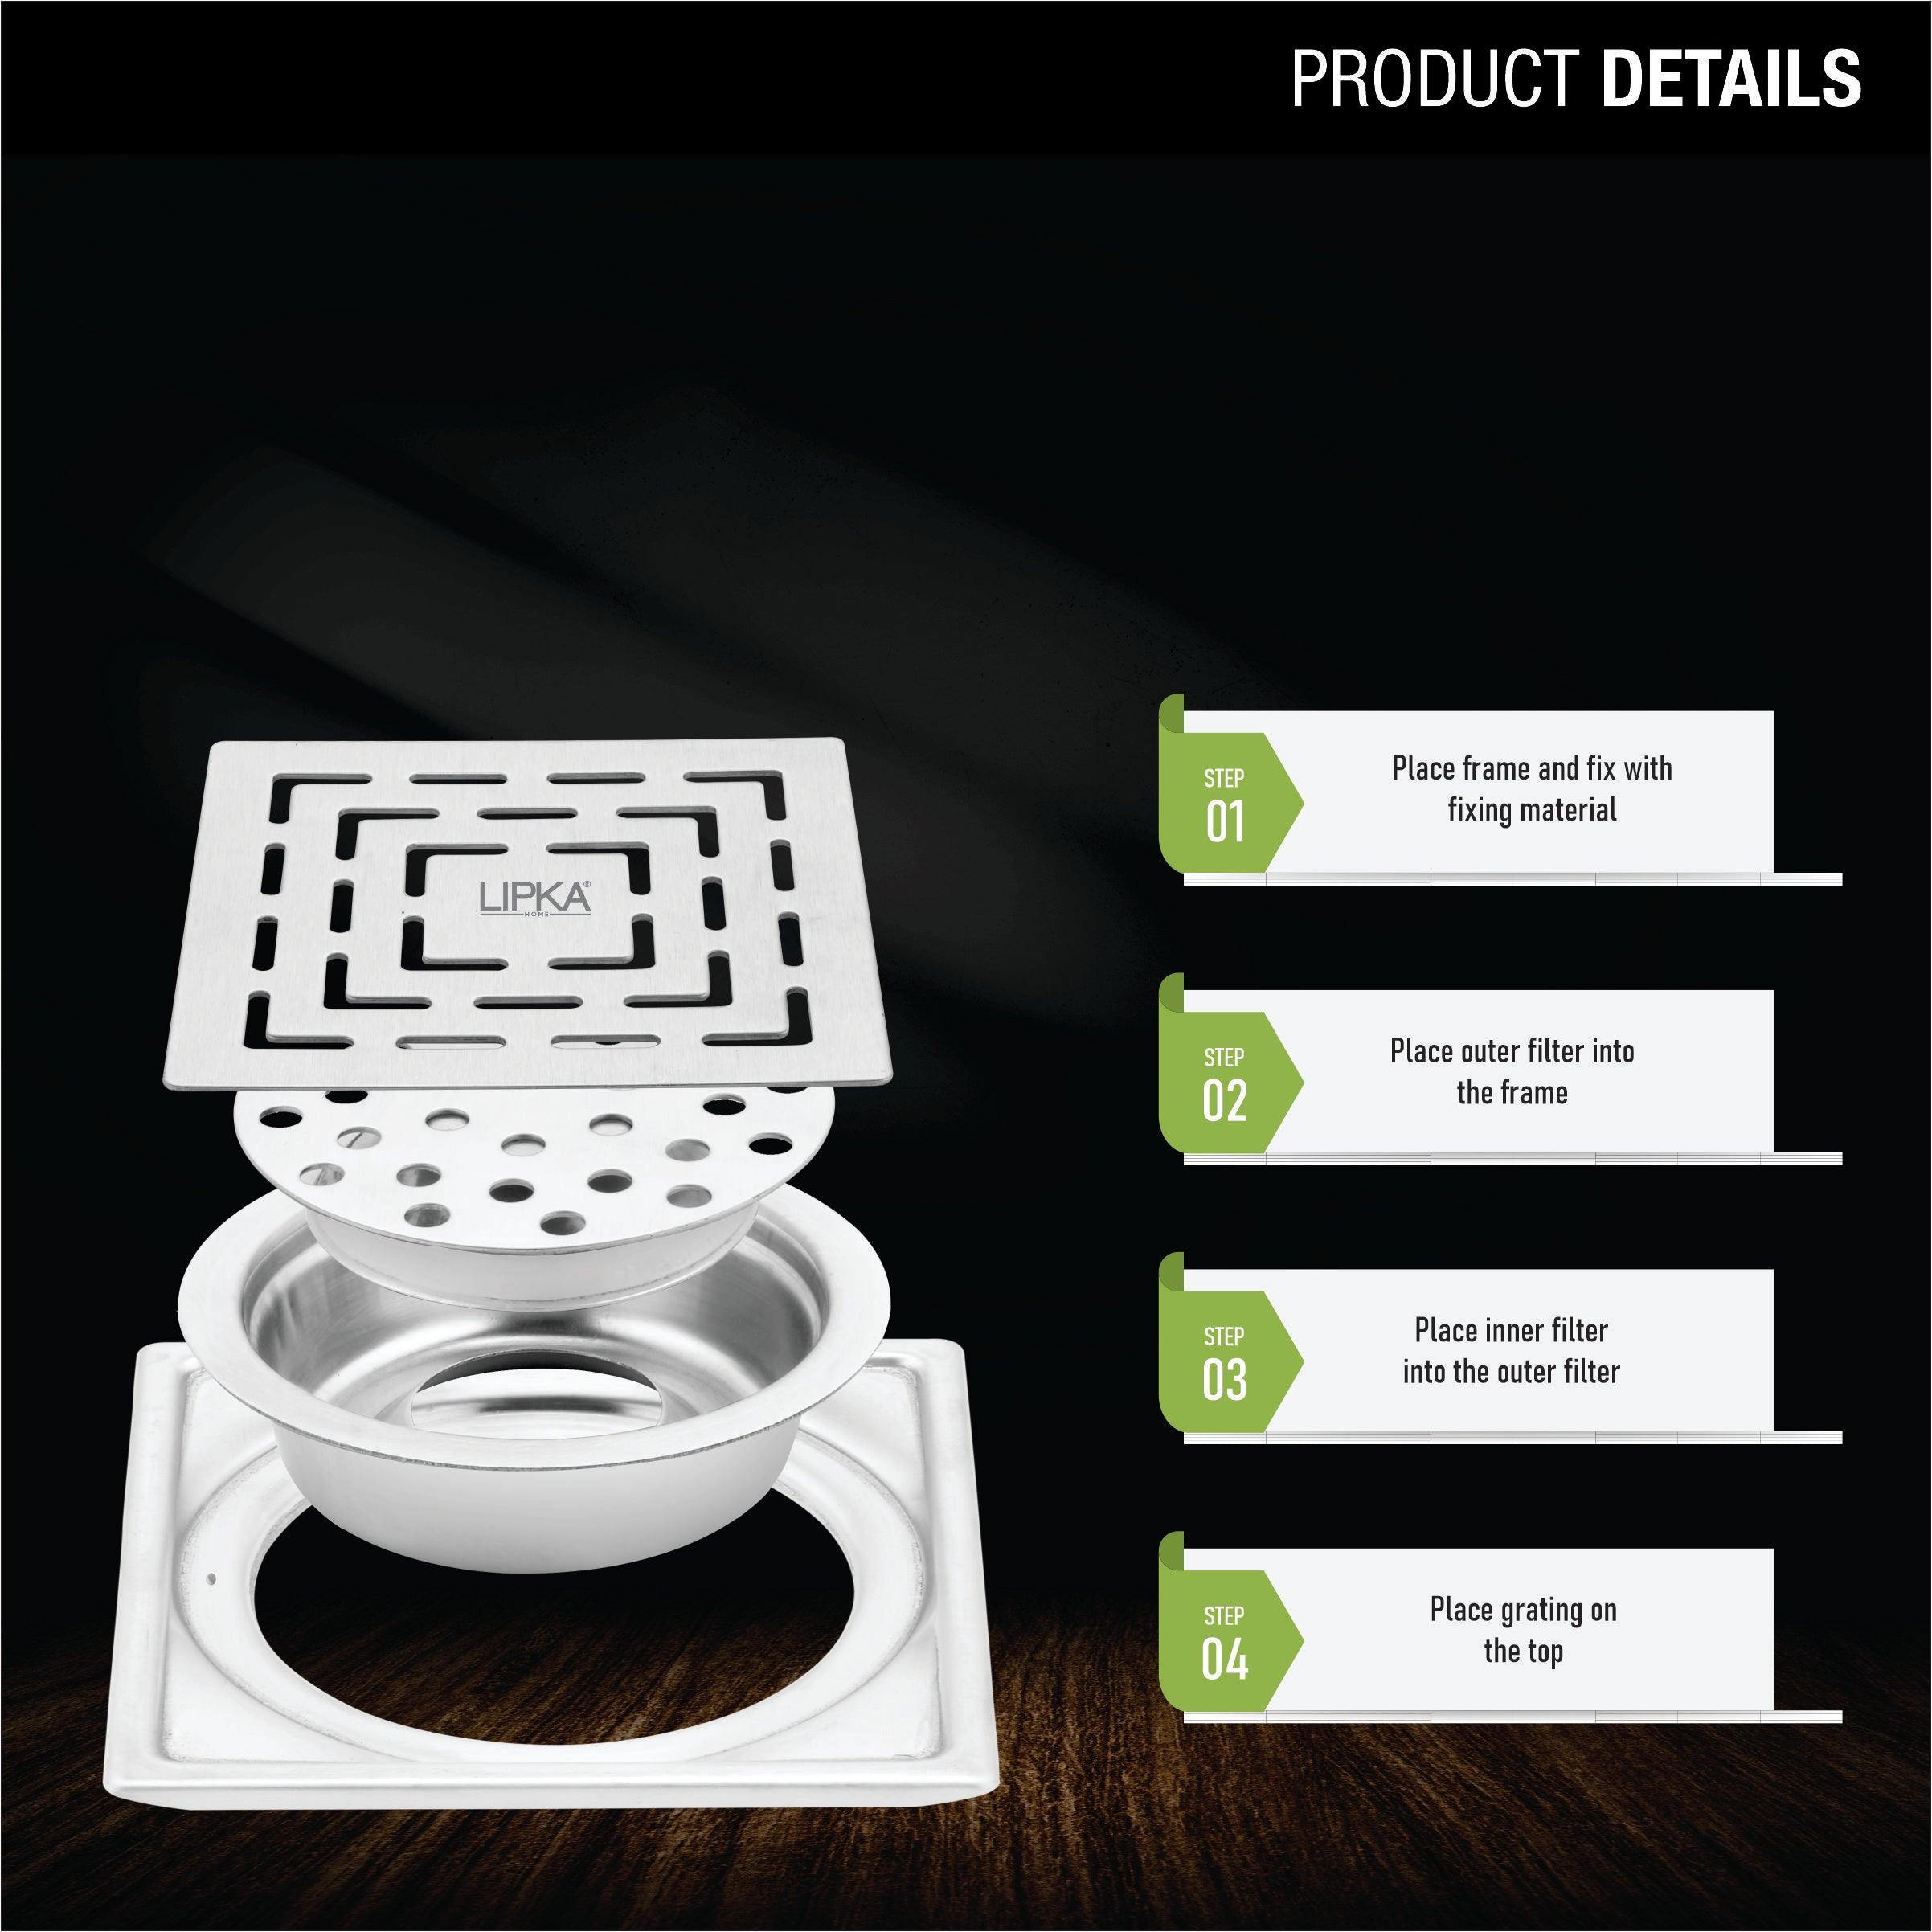 Orange Exclusive Square Floor Drain (5 x 5 Inches) with Cockroach Trap product details